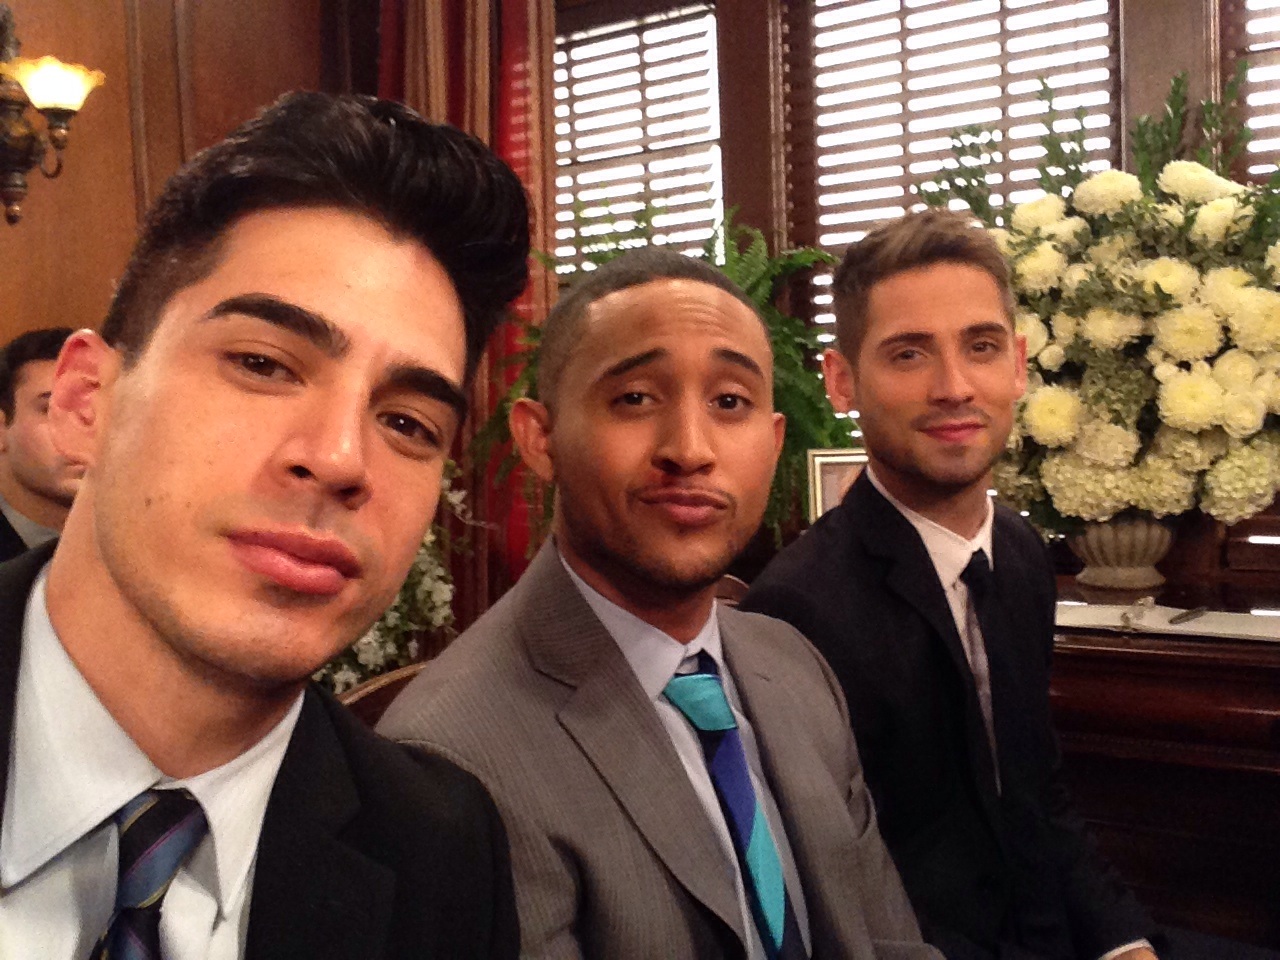 Set still with Tahj Mowry and Jean-Luc Bilodeau of ABC Family's Baby Daddy - 9/18/14